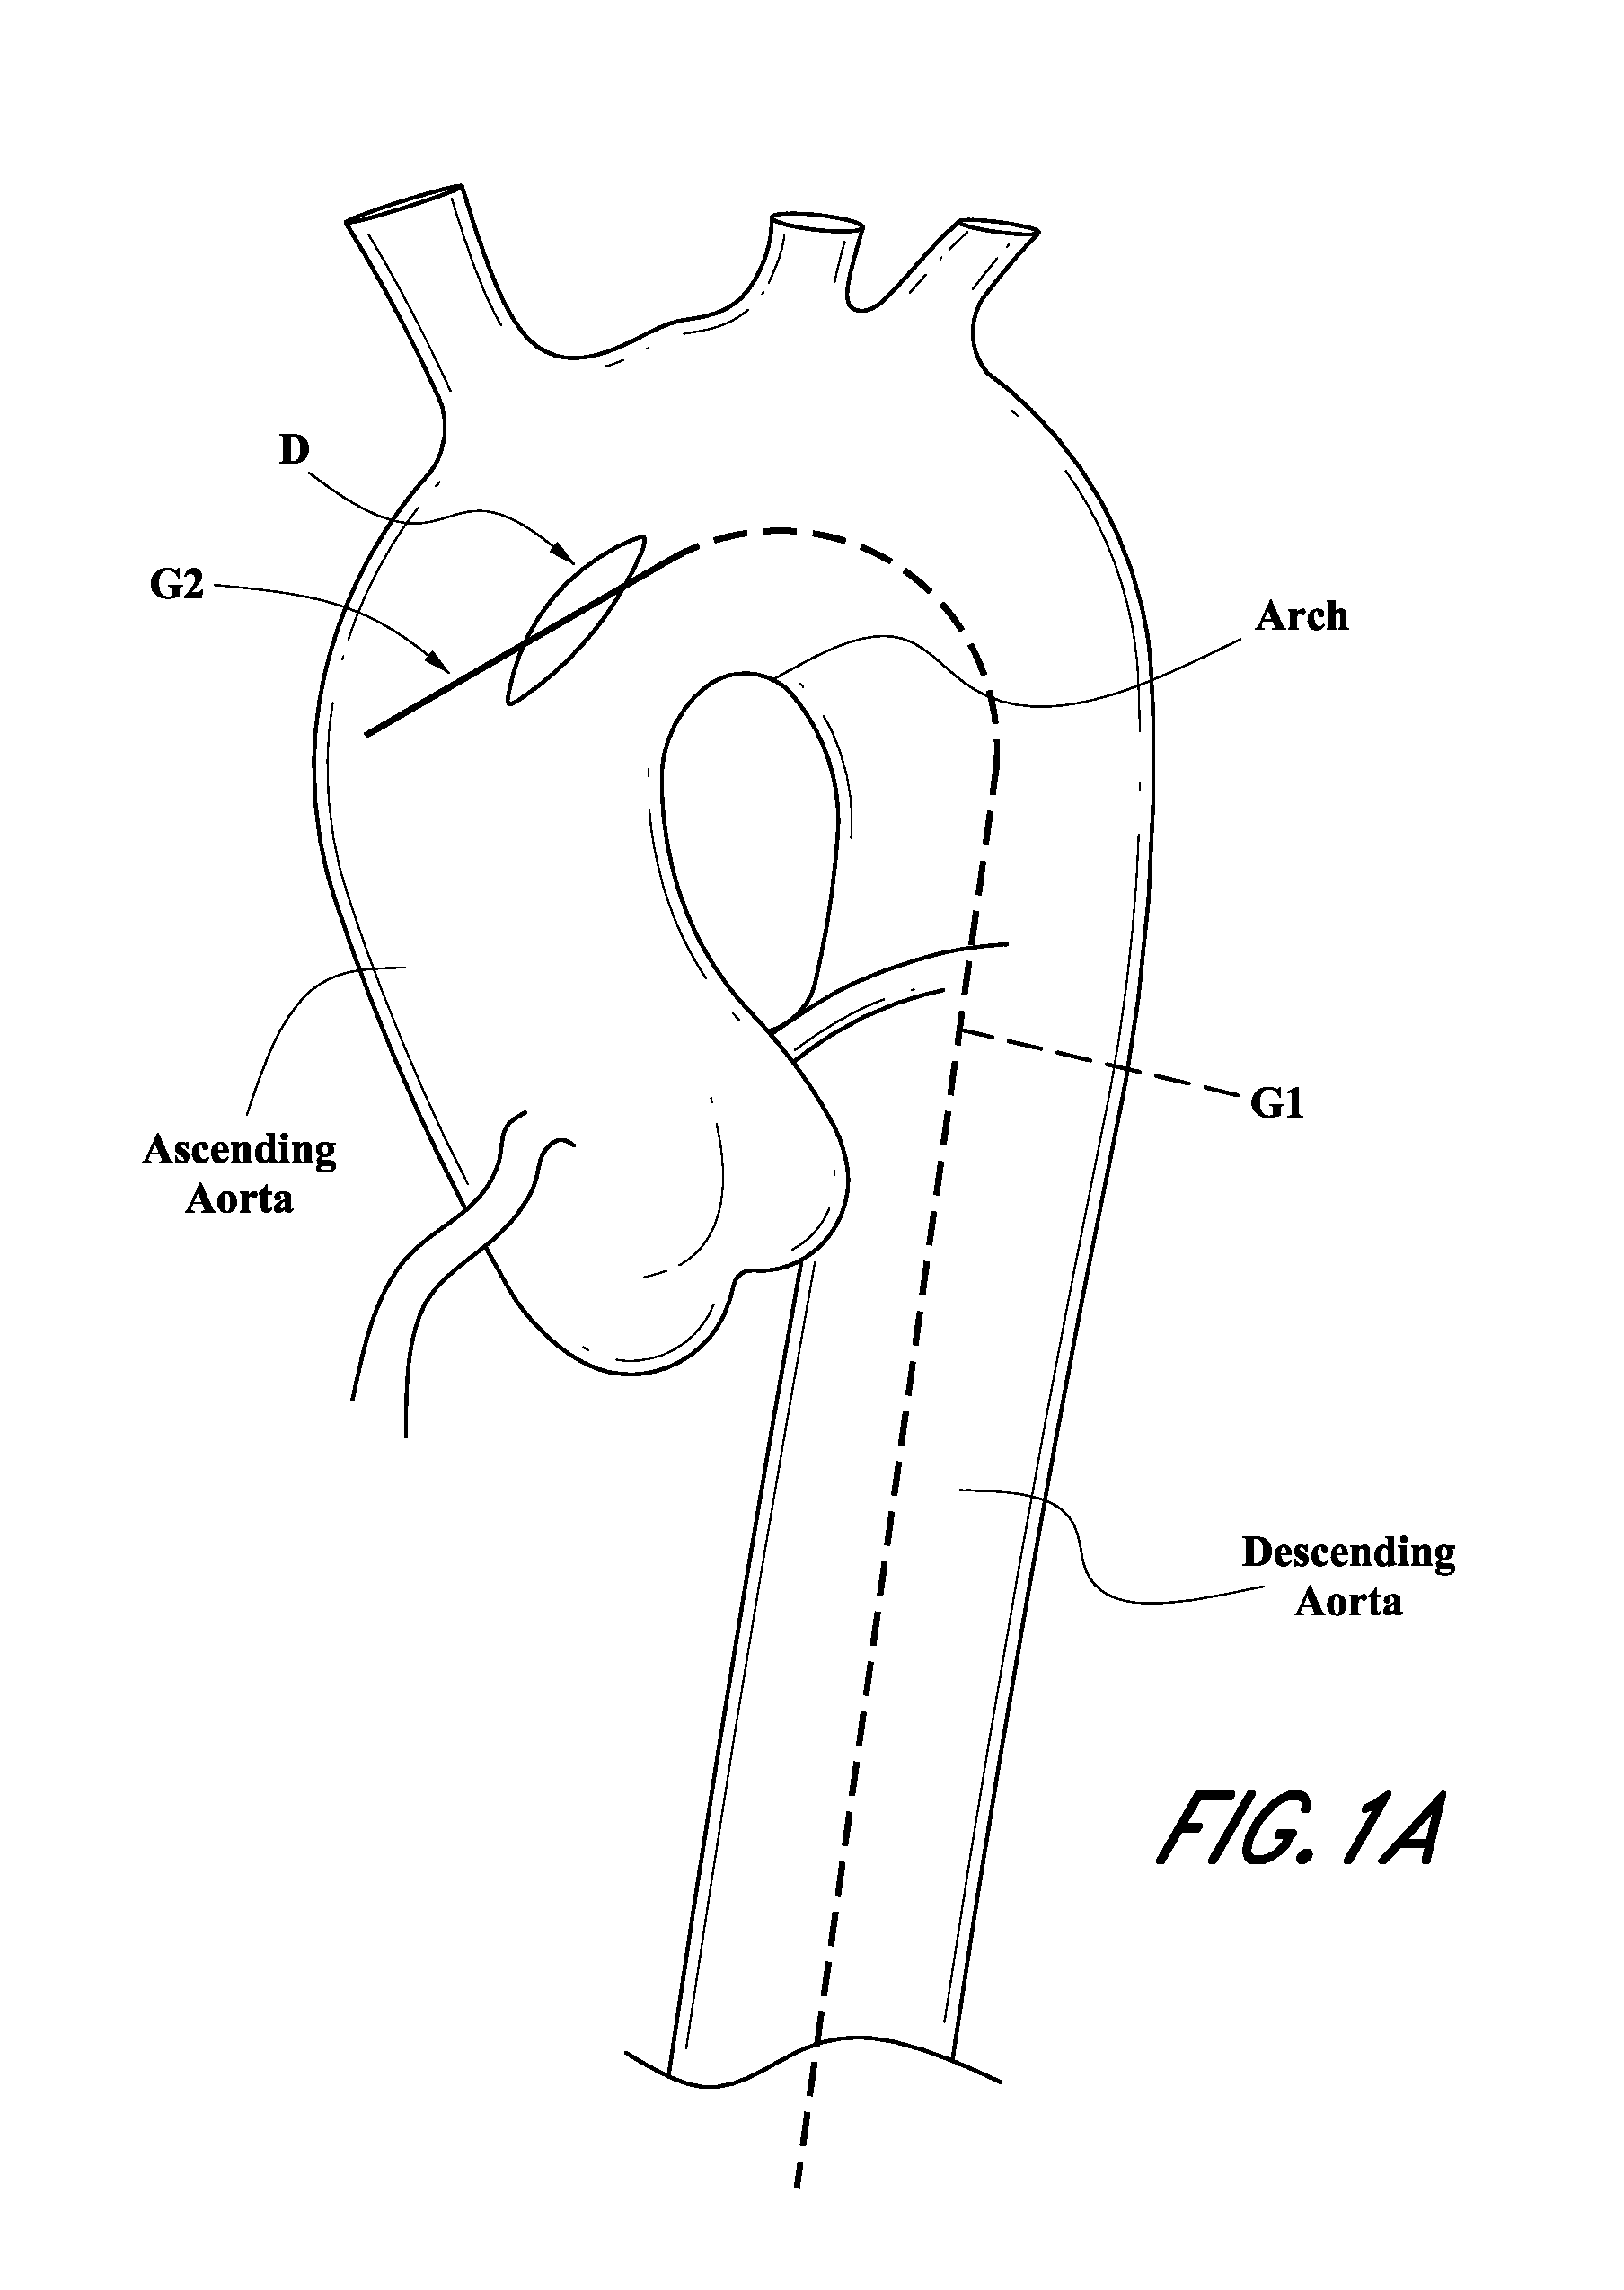 Vascular graft device placement system and method